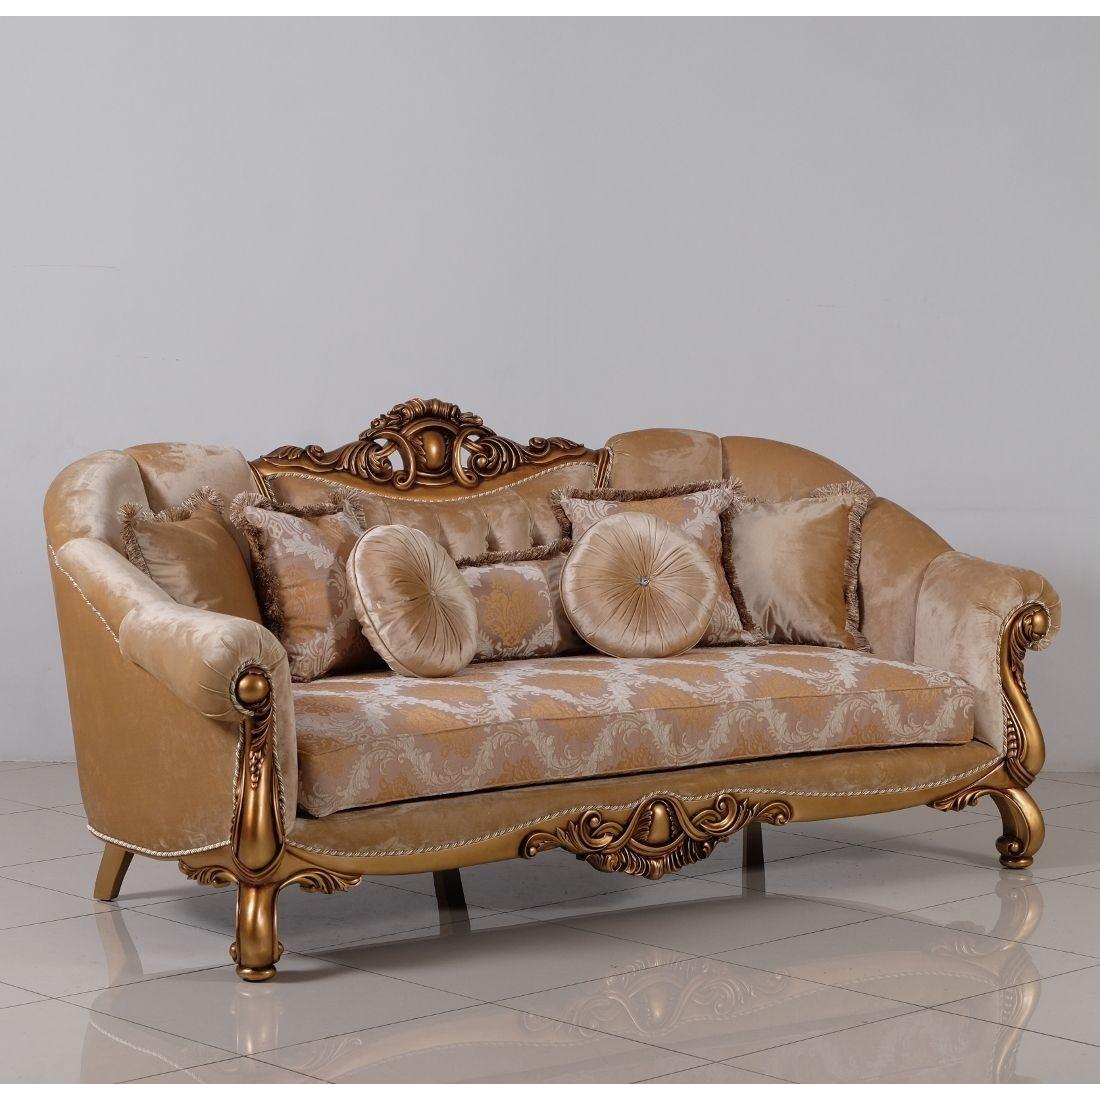 Classic, Traditional Sofa GOLDEN KNIGHTS 4590-S in Gold, Bronze, Beige Fabric